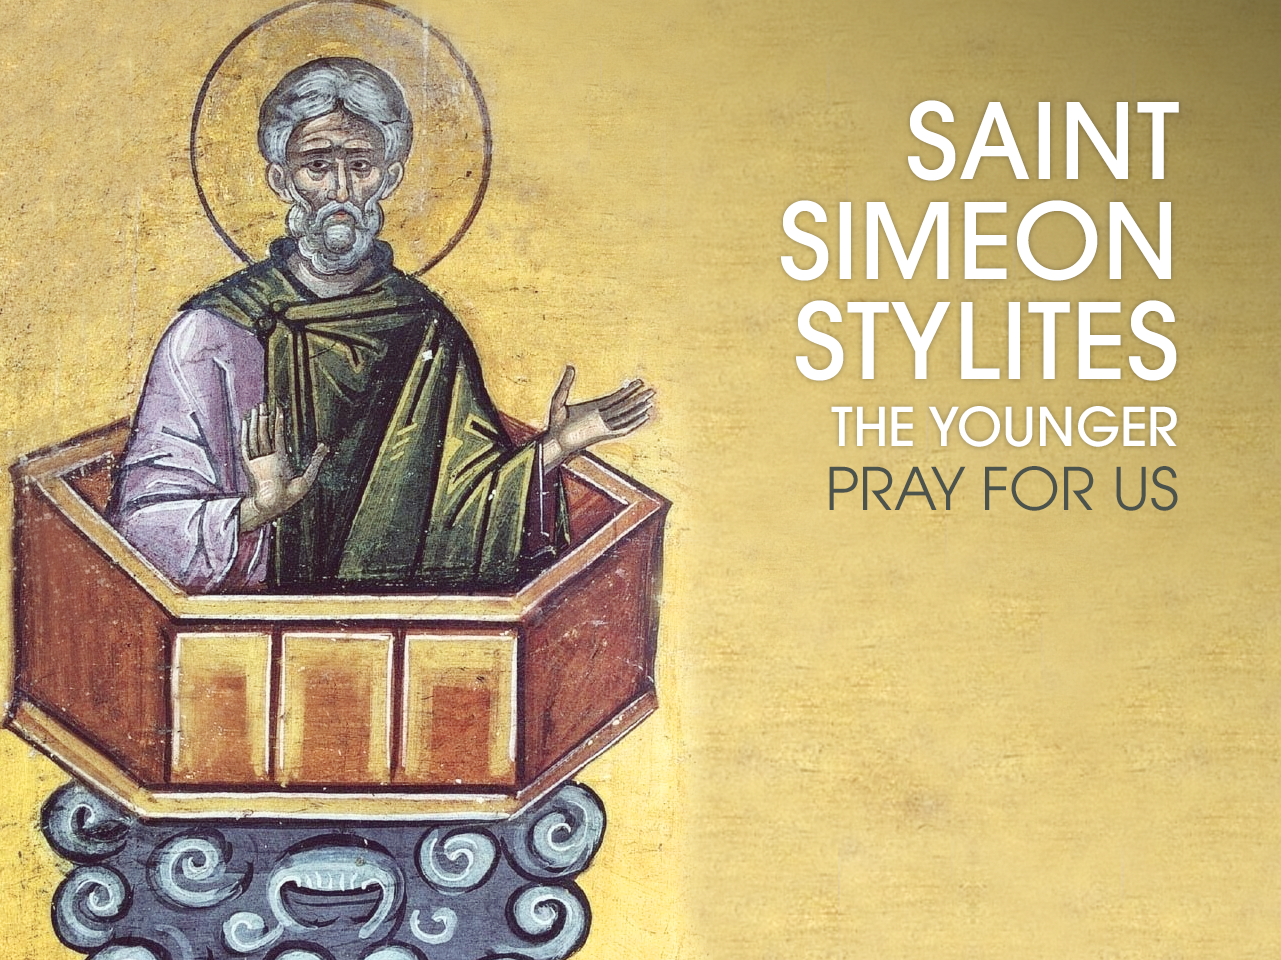 St. Simeon Stylites the Younger